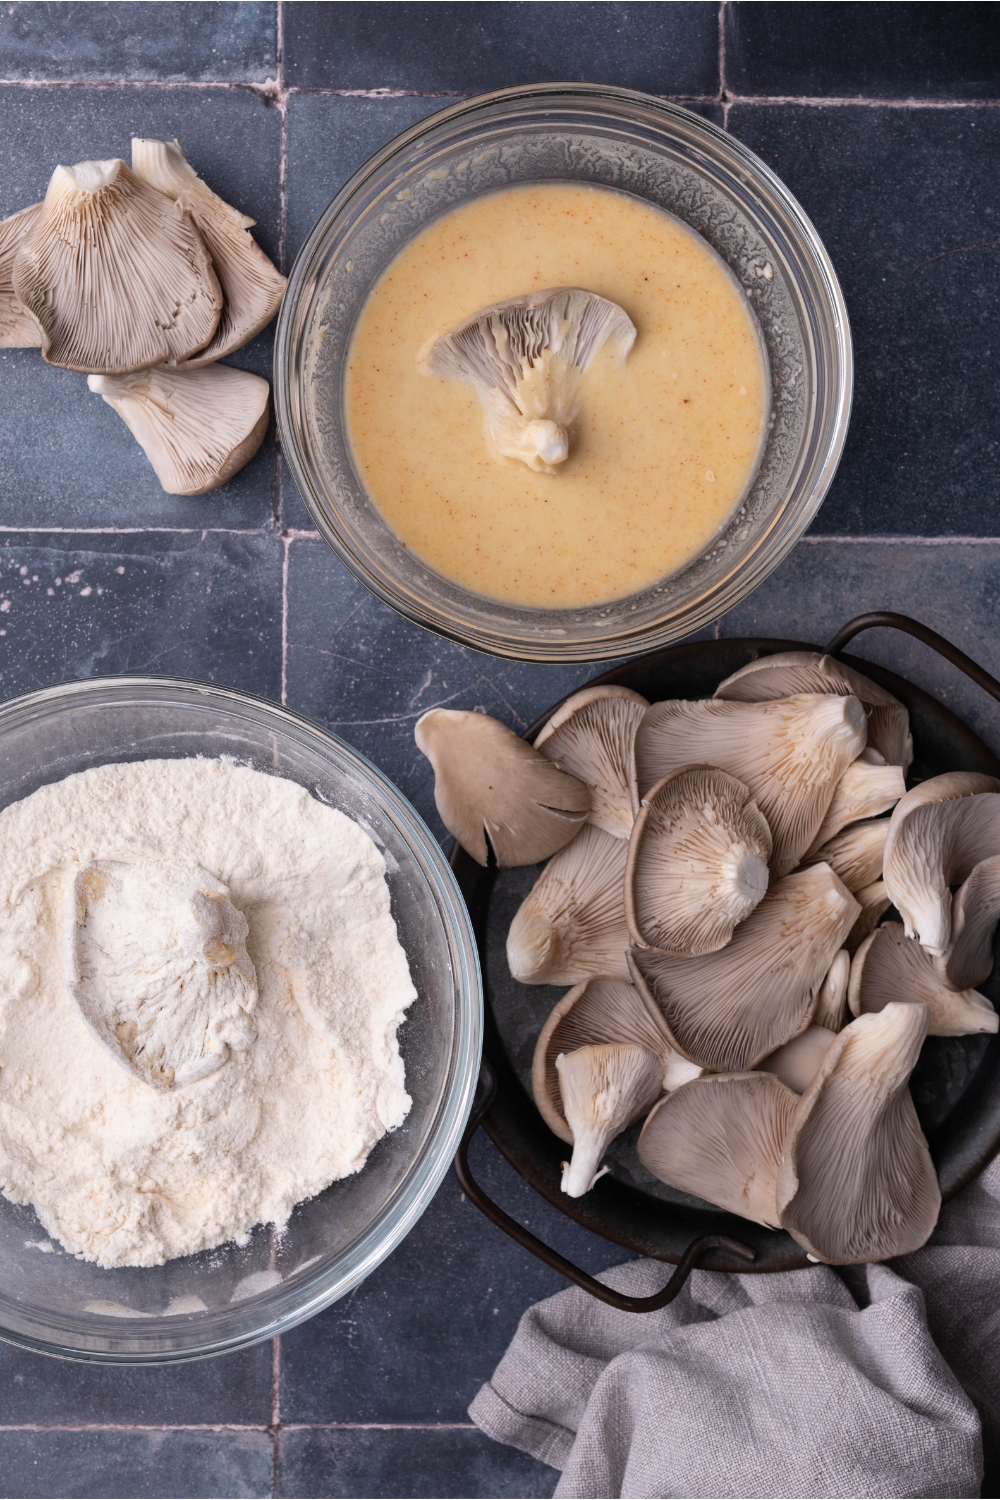 A plate of oyster mushrooms next to two bowls, one with a dry flour mixture and one with a wet mixture. One mushroom is in the wet mixture and one mushroom is in the dry mixture.